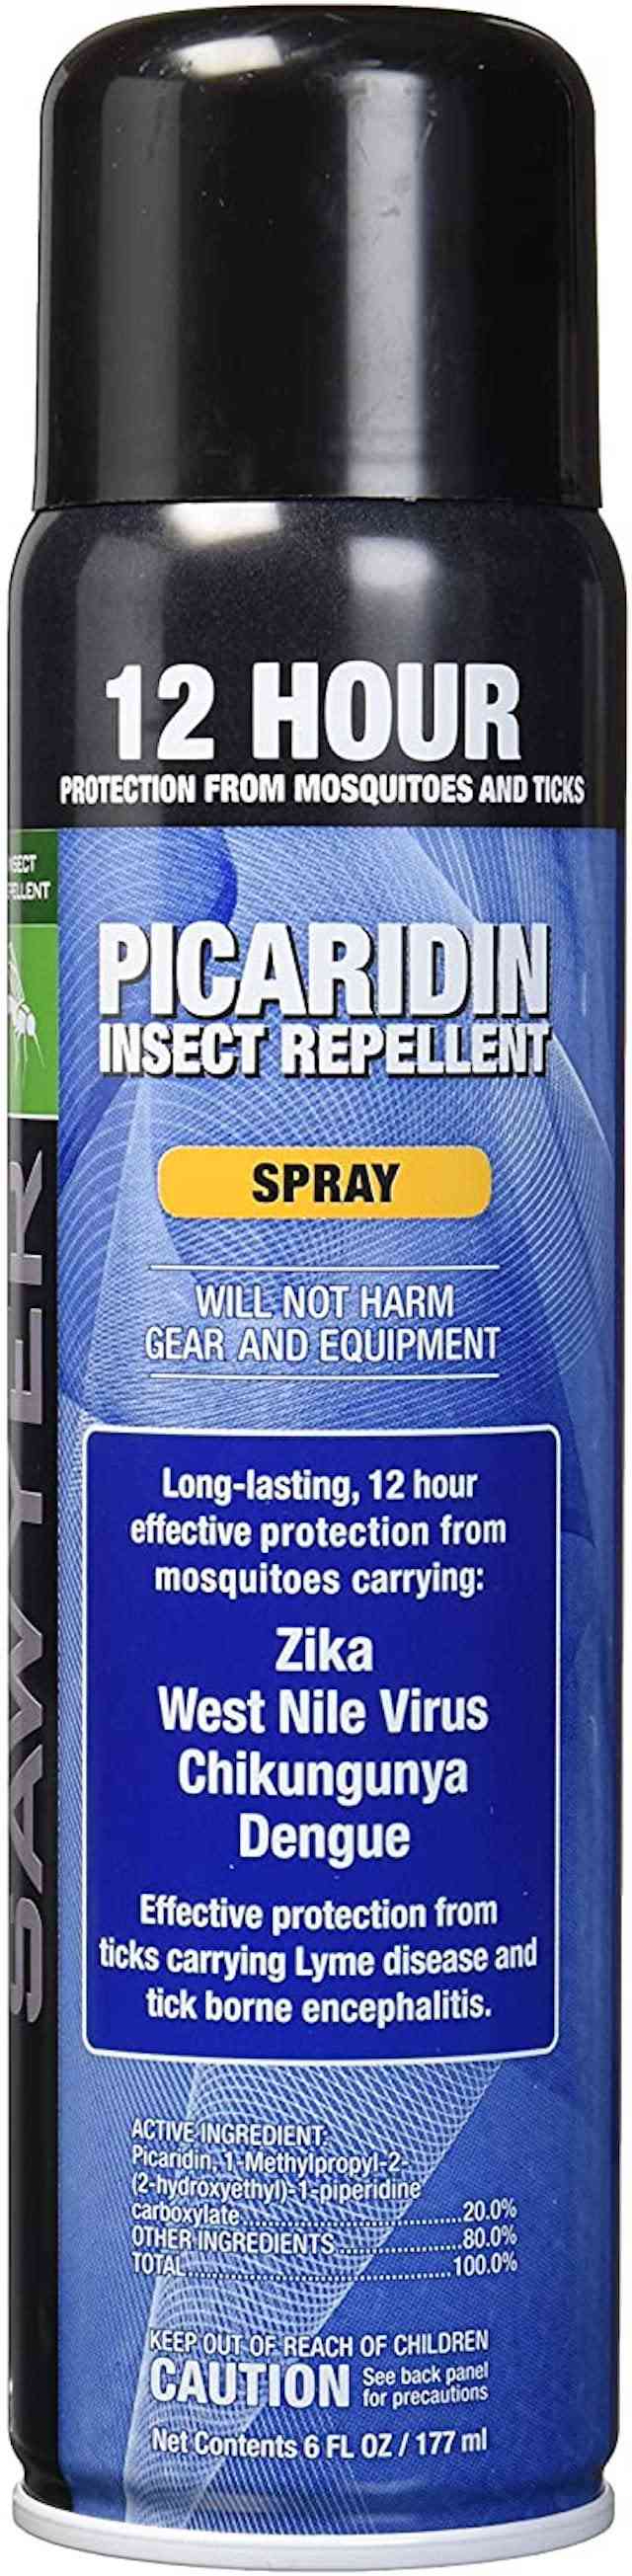 Picaridin Continuous Spray Insect Repellent